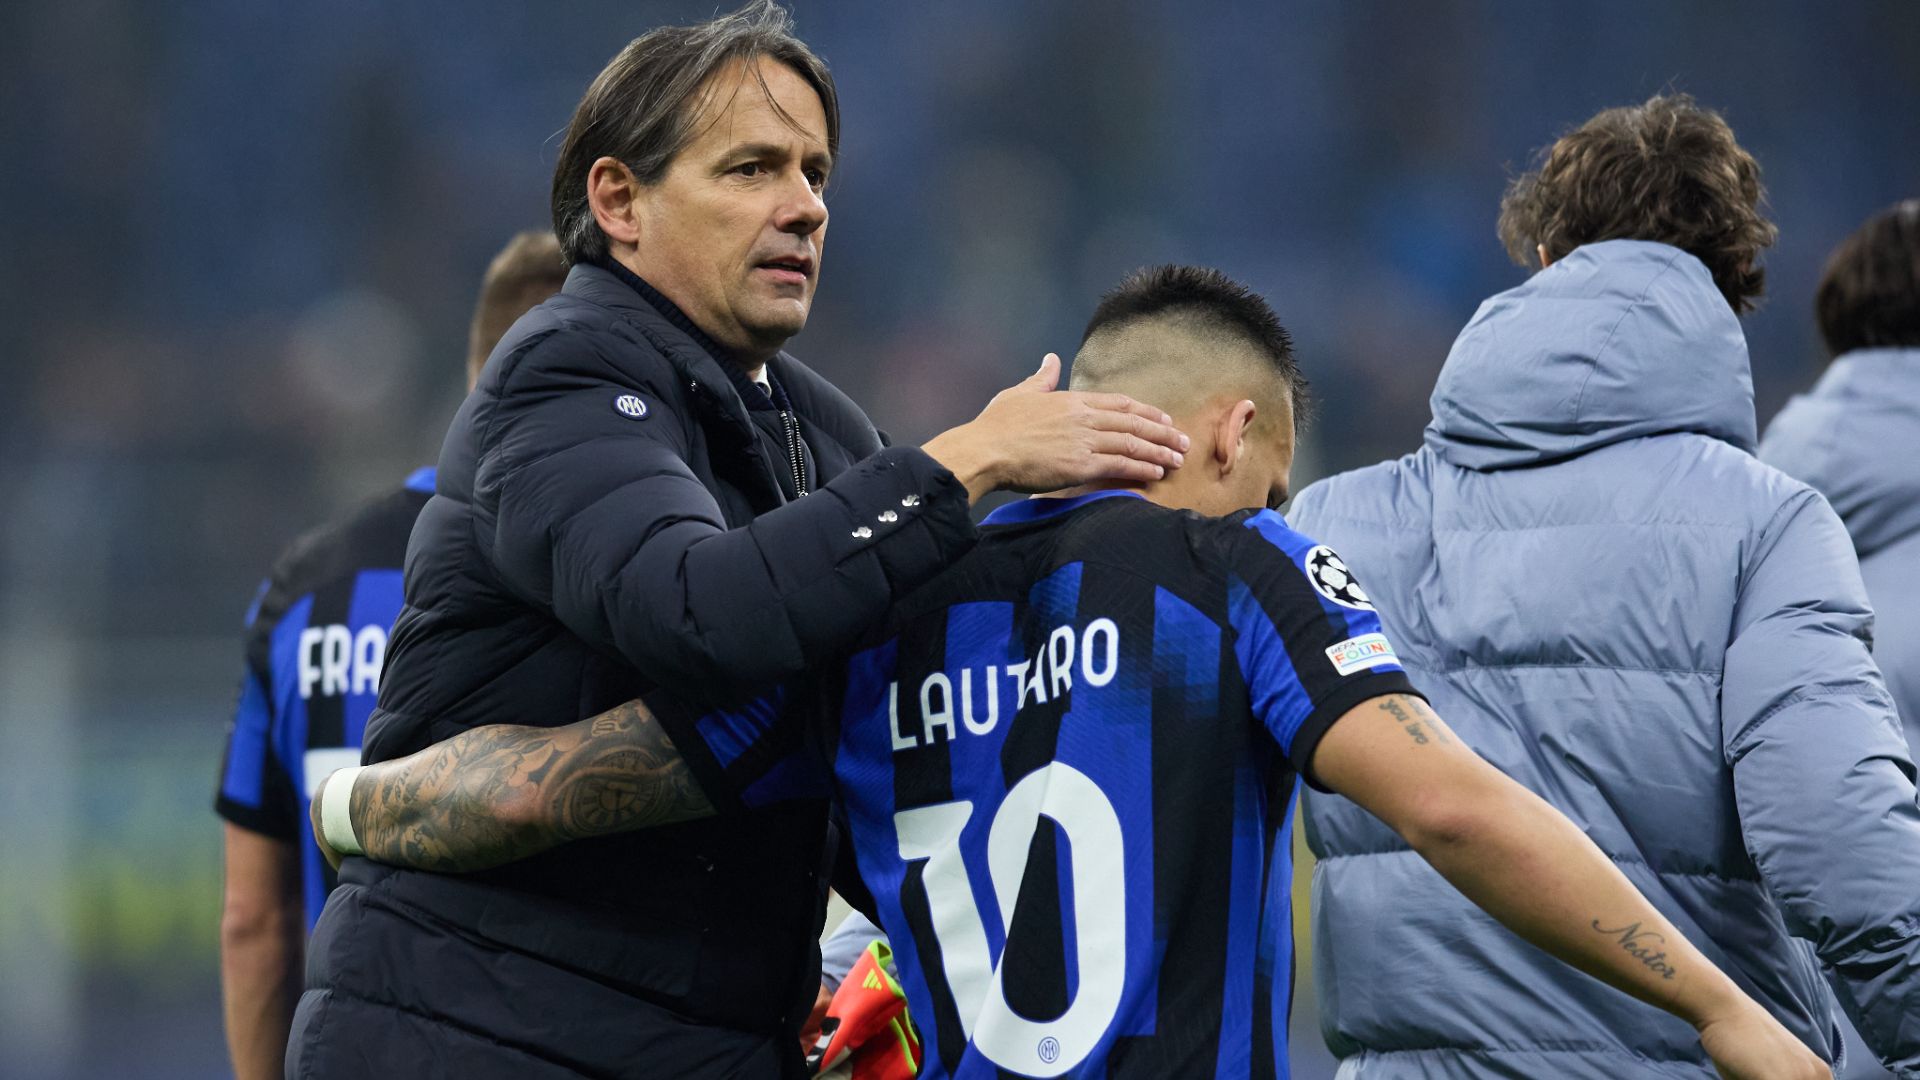 Inzaghi unconcerned by Lautaro 